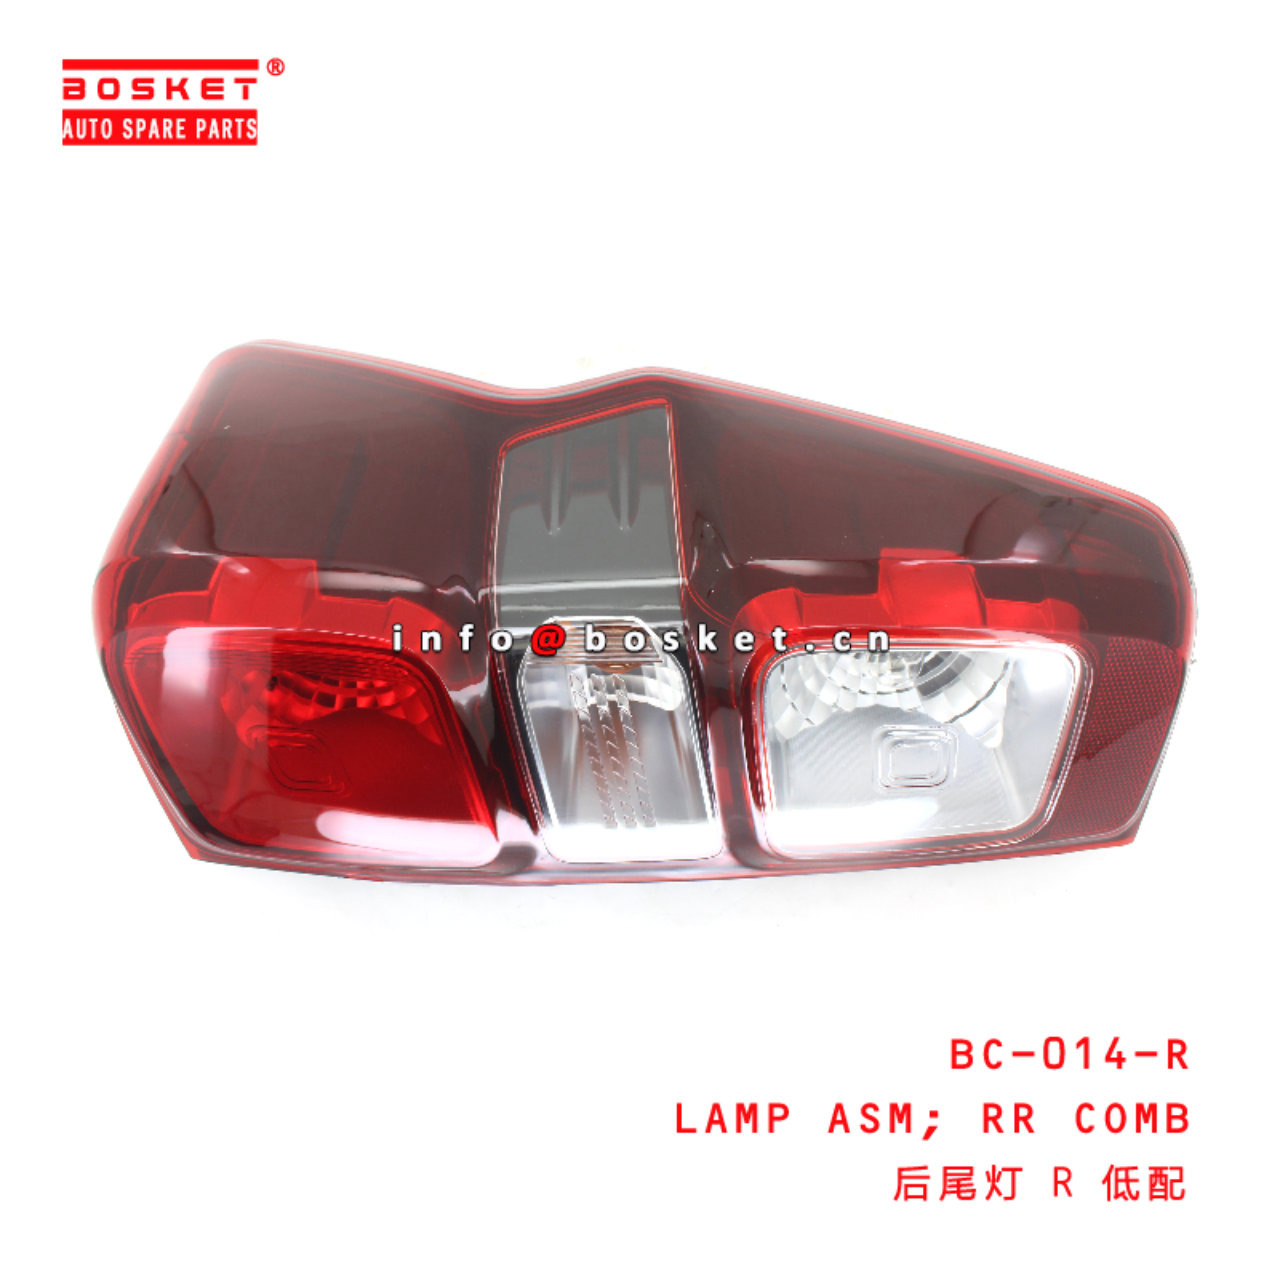 BC-014-R Rear Combination Lamp Assembly suitable for ISUZU DMAX2021  BC-014-R